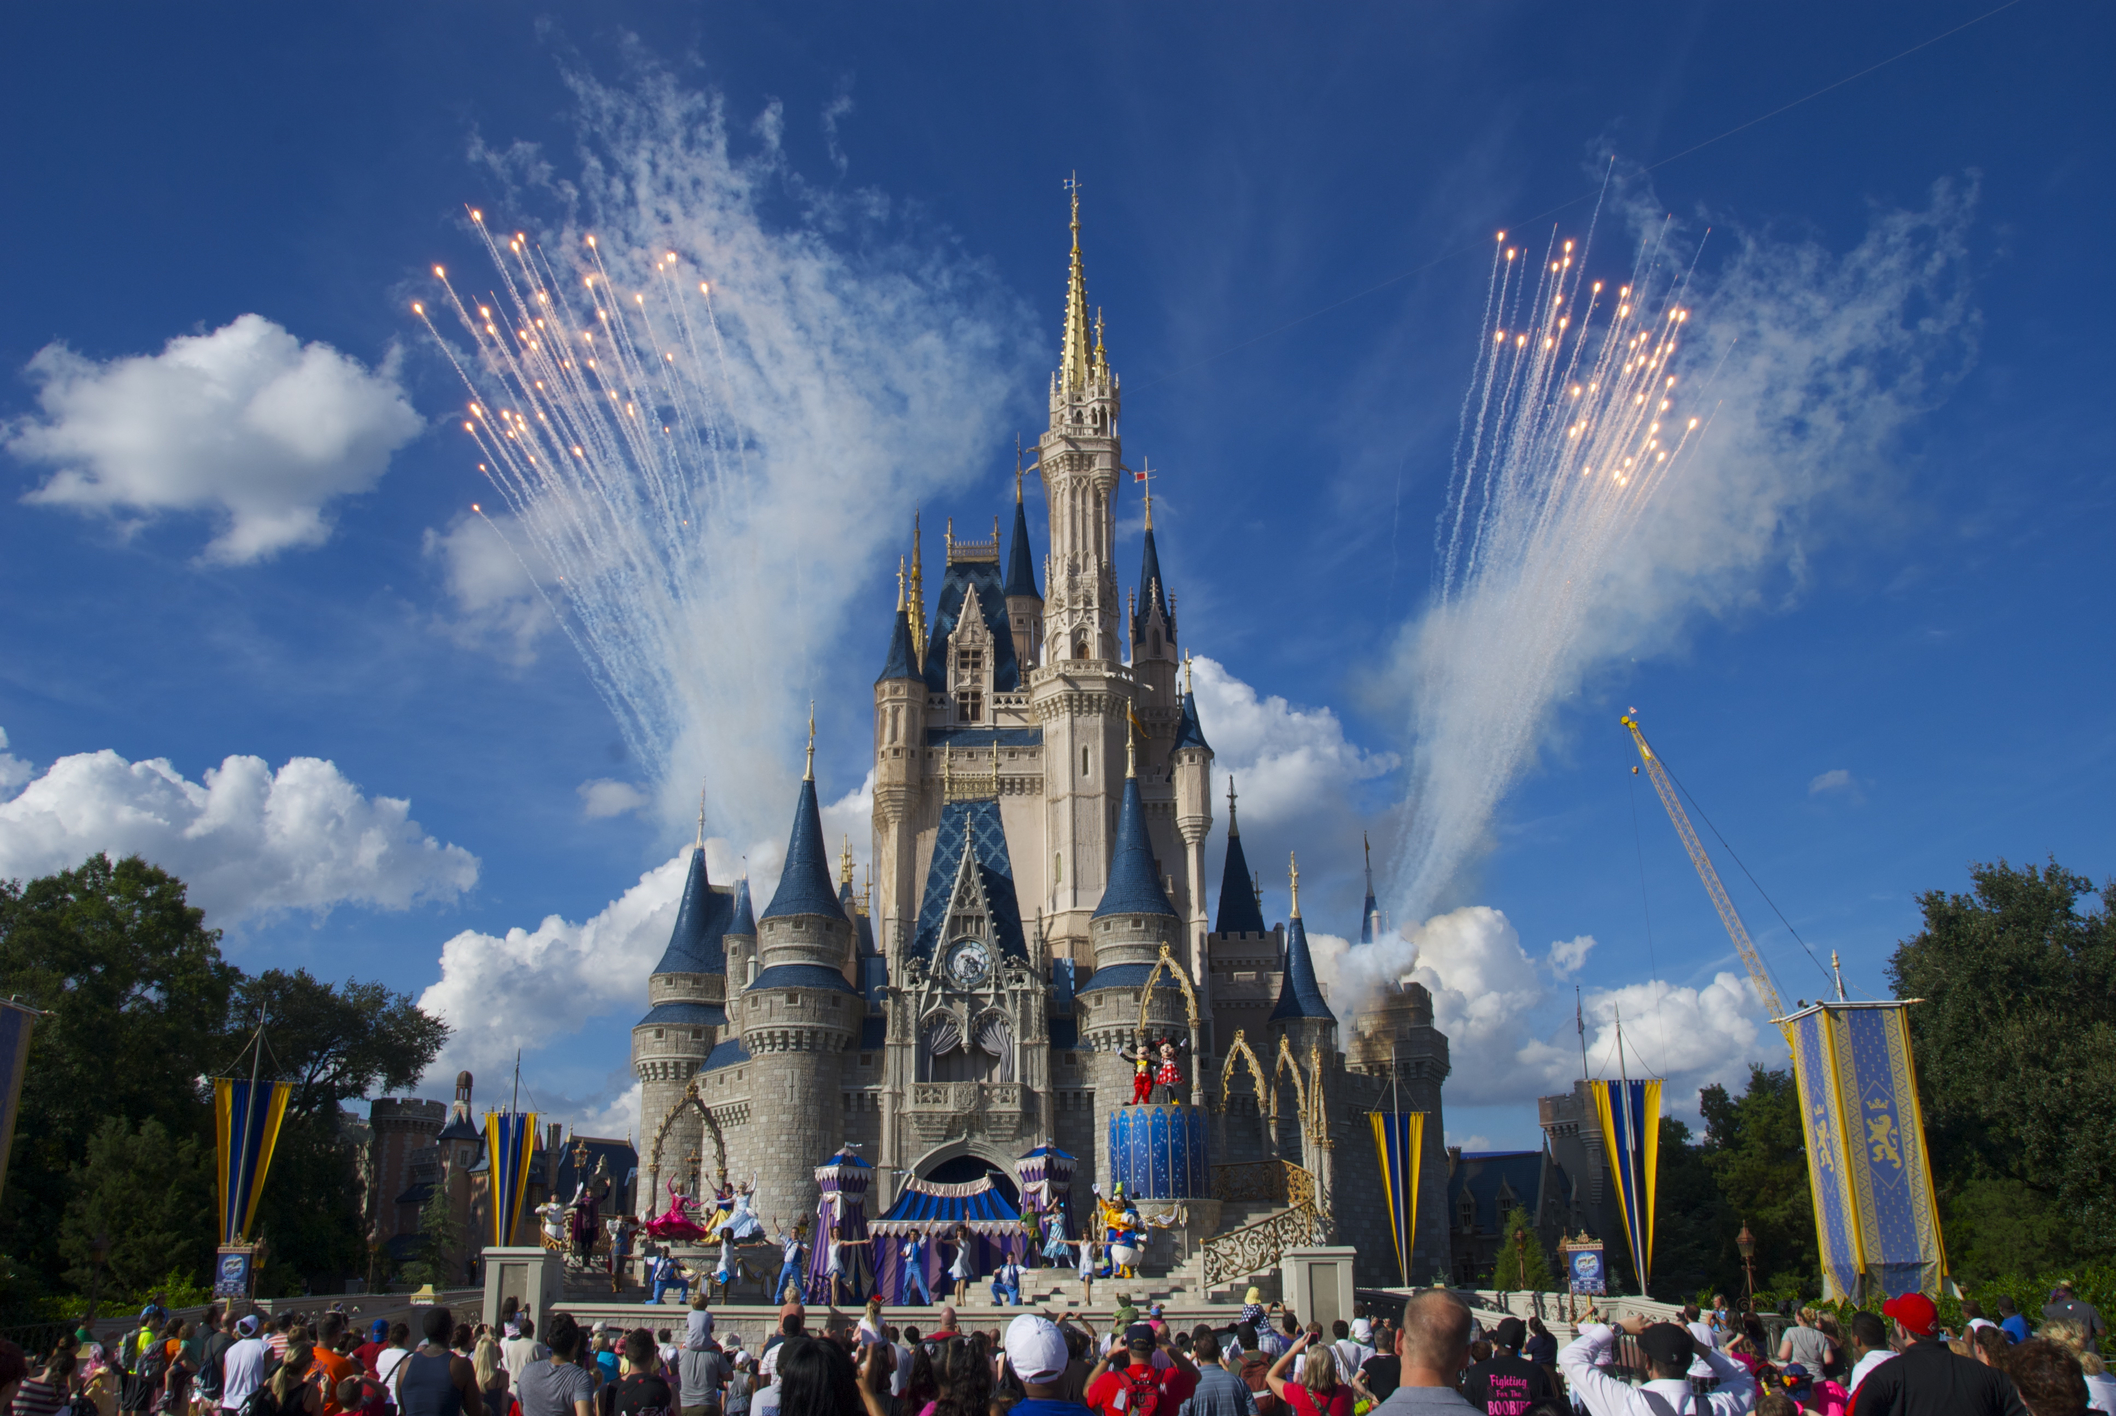 Disney World tickets: 4-day, 4-park Magic Ticket for $89 per day